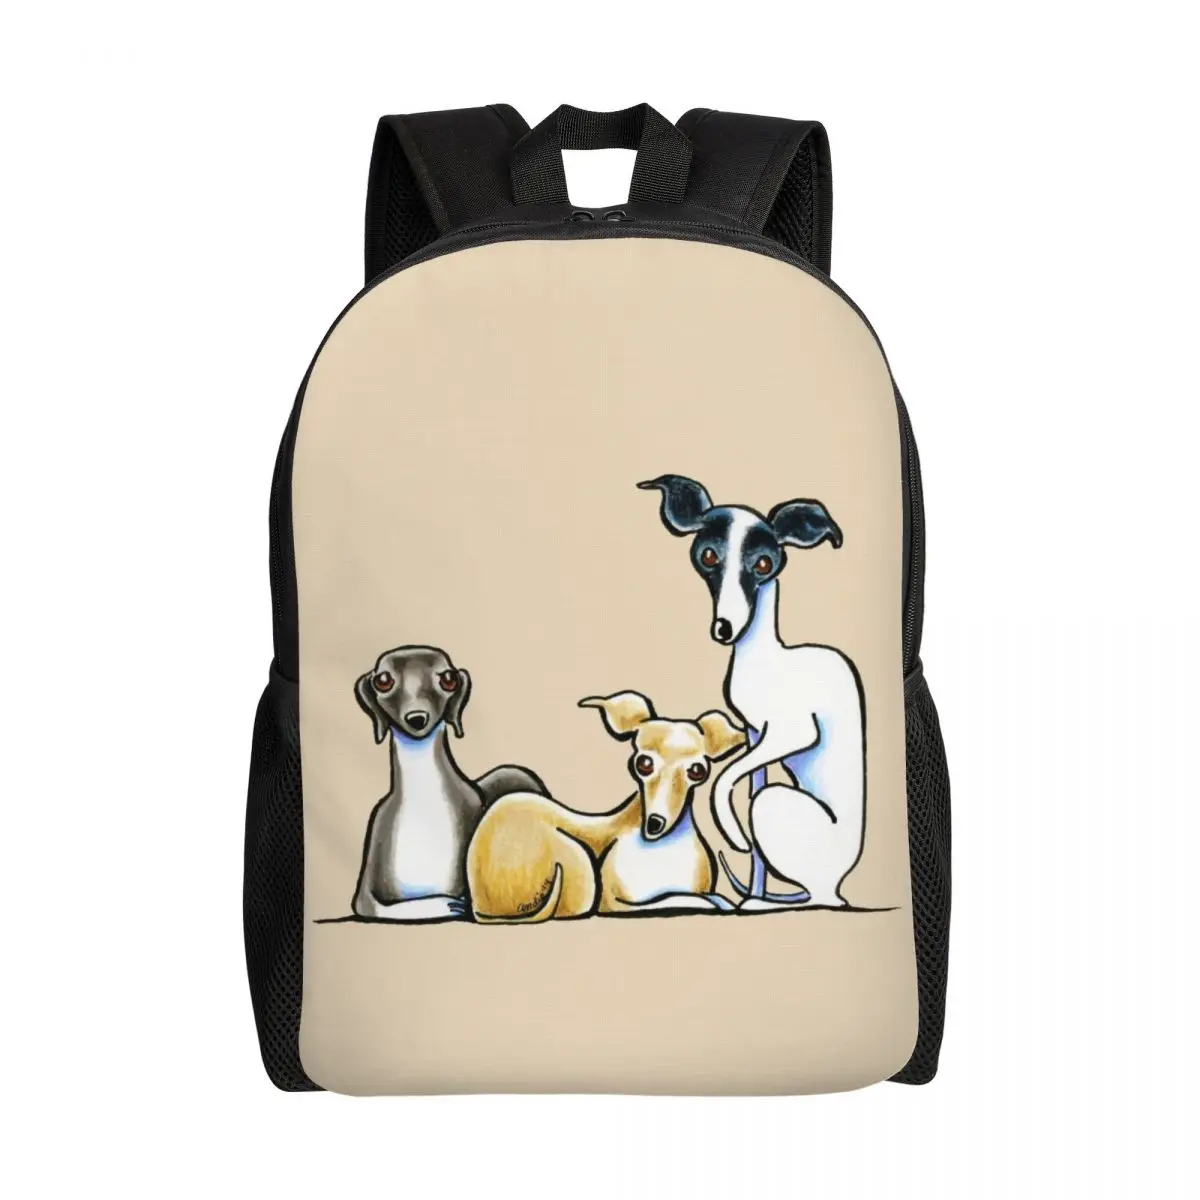 

3D Print Italian Greyhound Backpacks for Cute Whippet Sighthound Dog College School Travel Bags Bookbag Fits 15 Inch Laptop